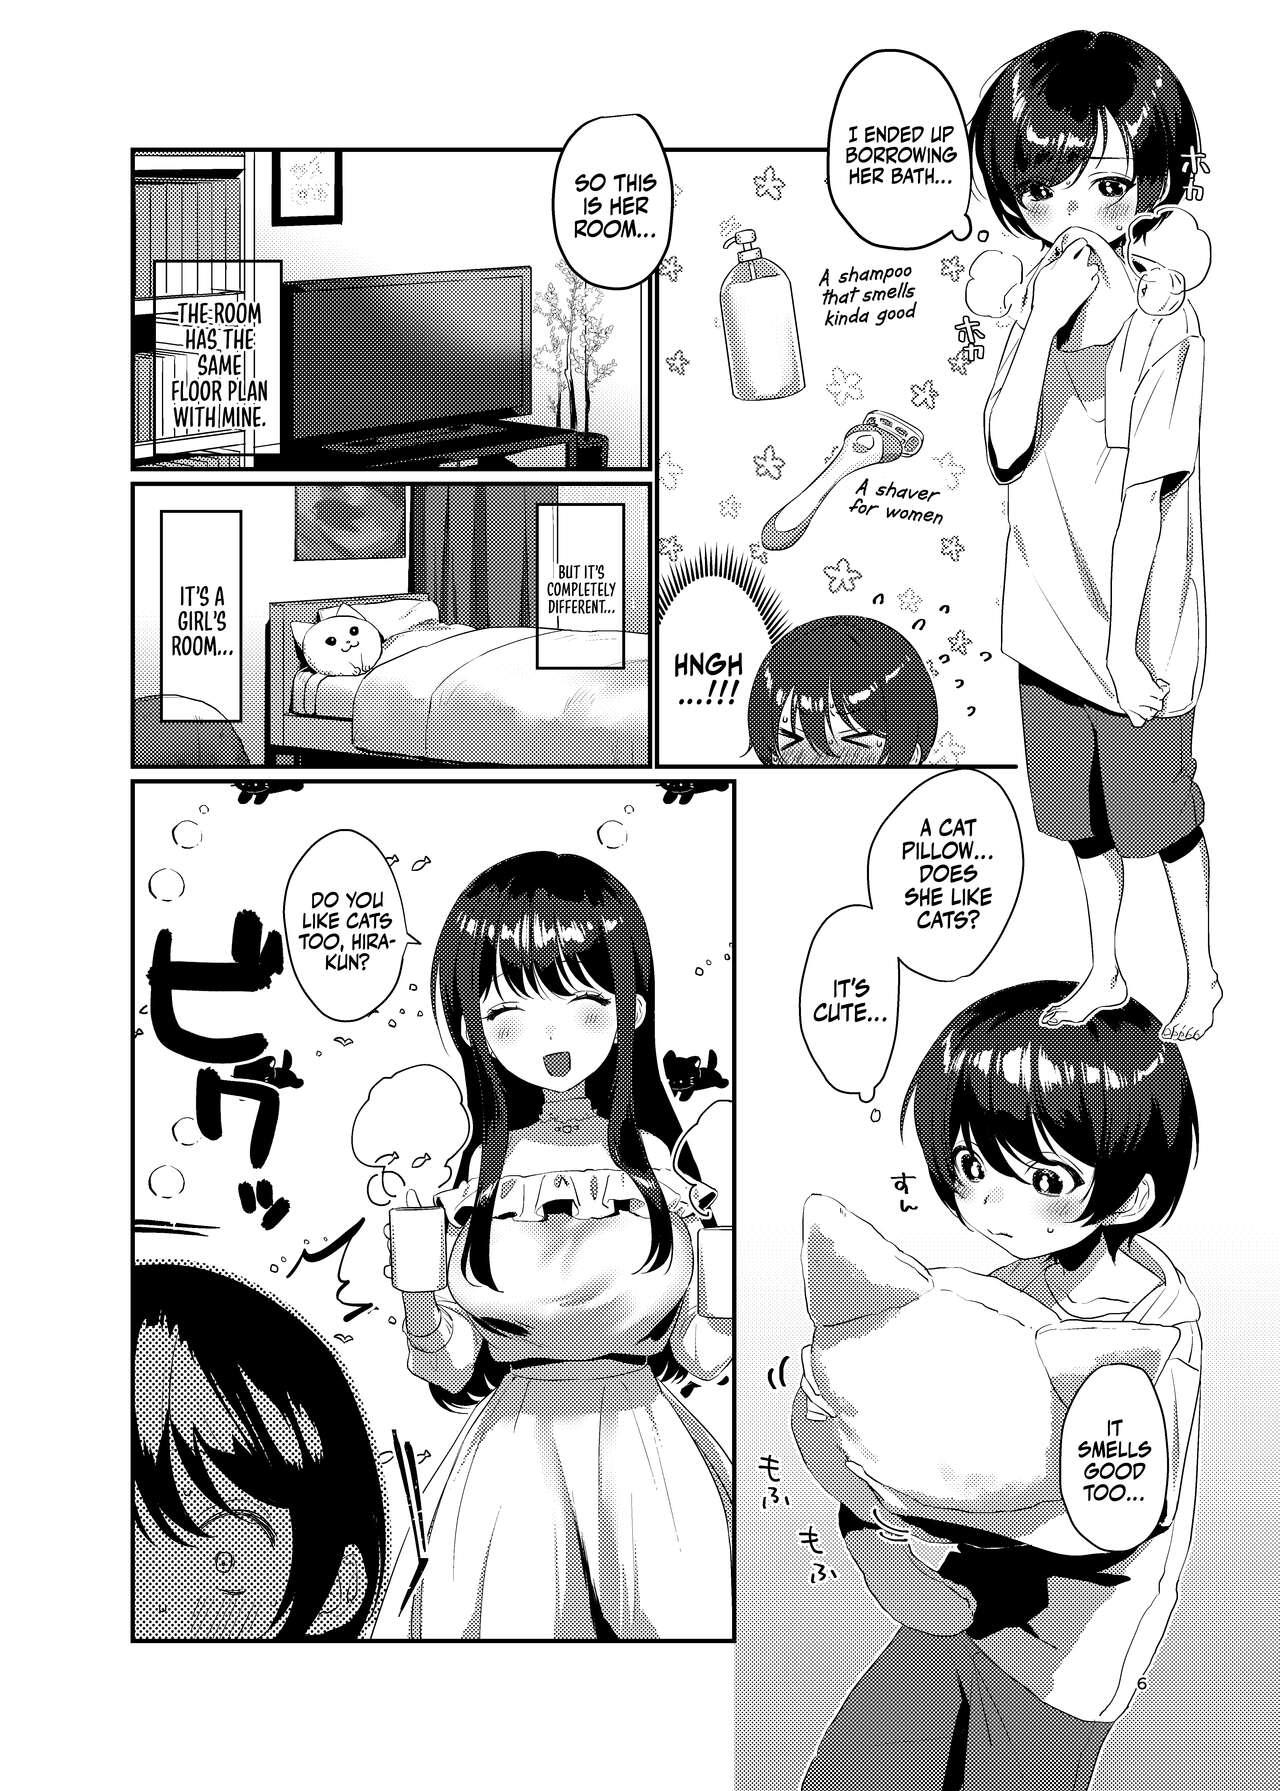 Best Blowjobs Ame, Nochi to Nari no Onee-san | Ame, Later Sister - Original Fellatio - Page 5